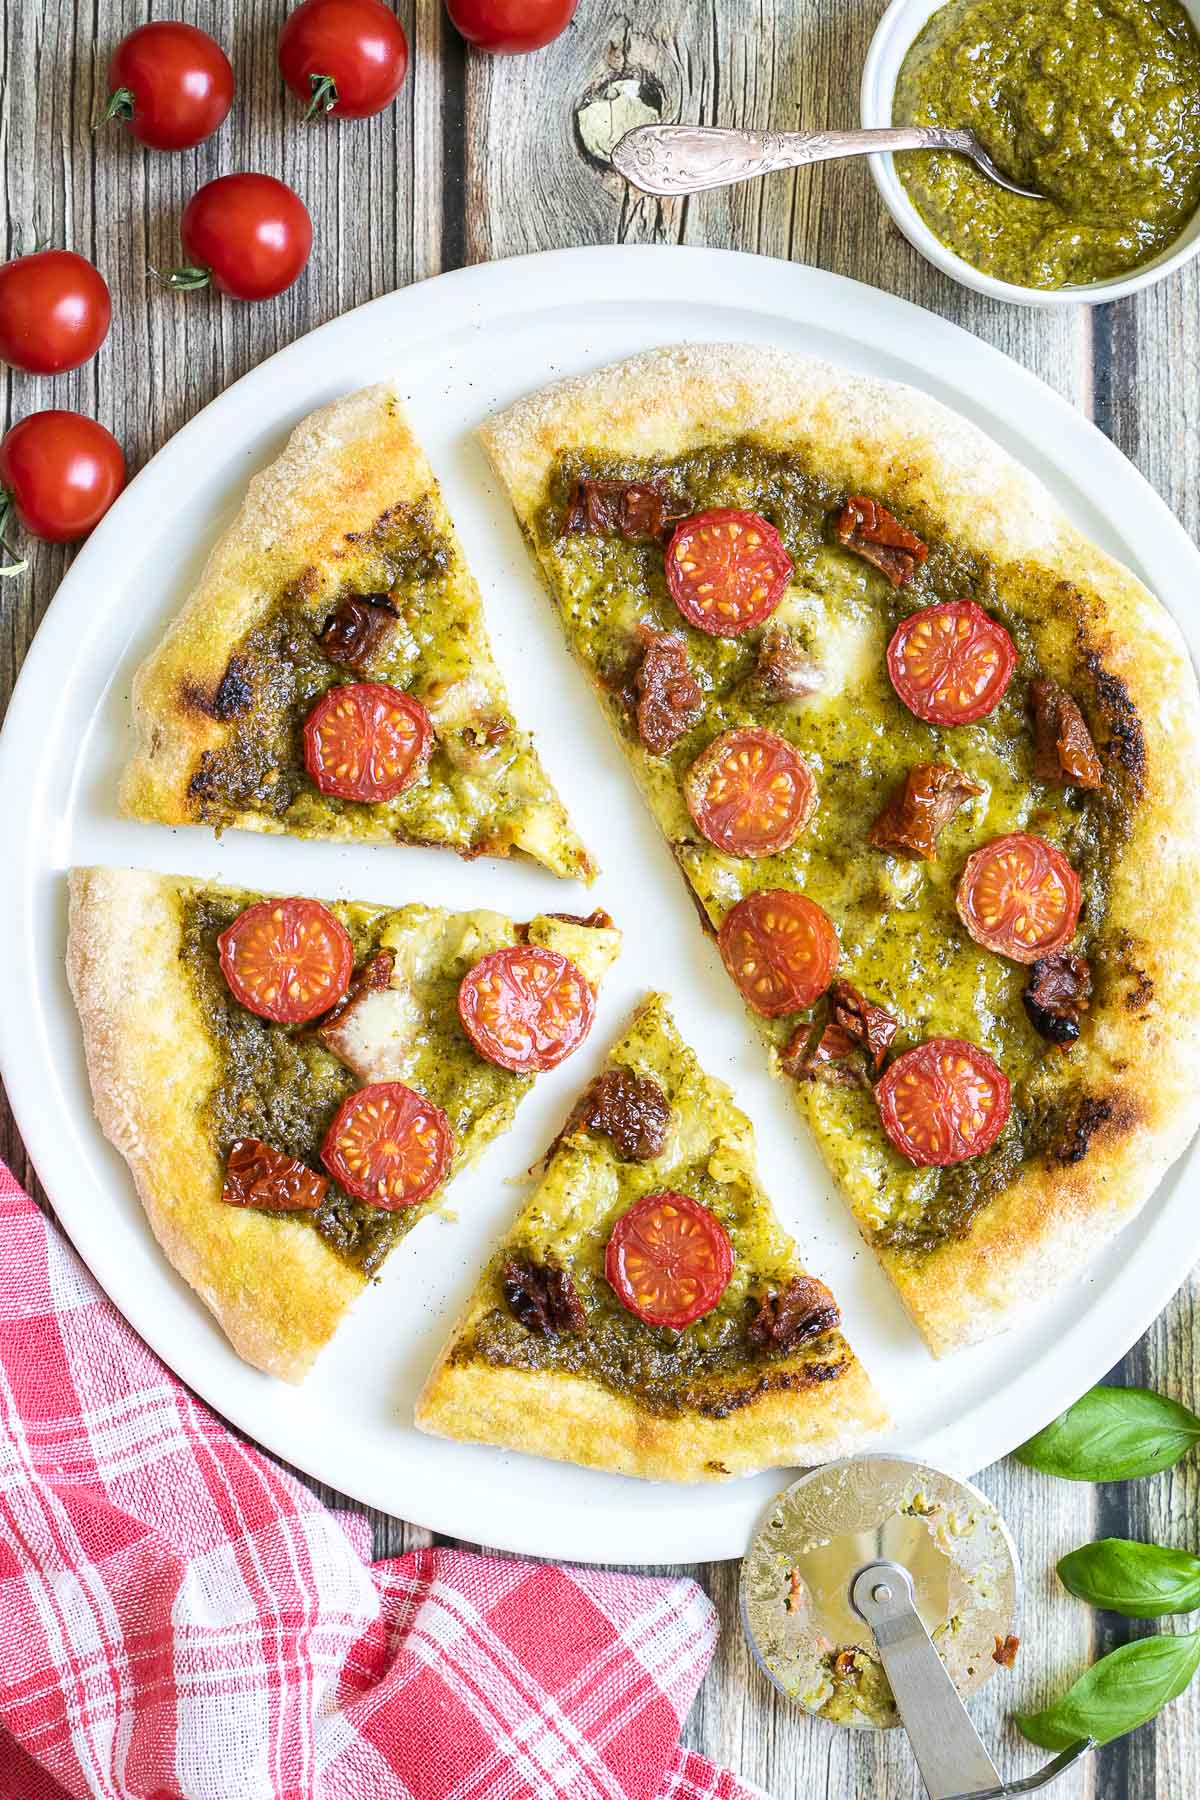 Sliced pizza on a white pizza plate topped with green pesto, melted cheese, sun-dried tomato pieces, and halved cherry tomatoes. More pesto and fresh ingredients next to the plate.